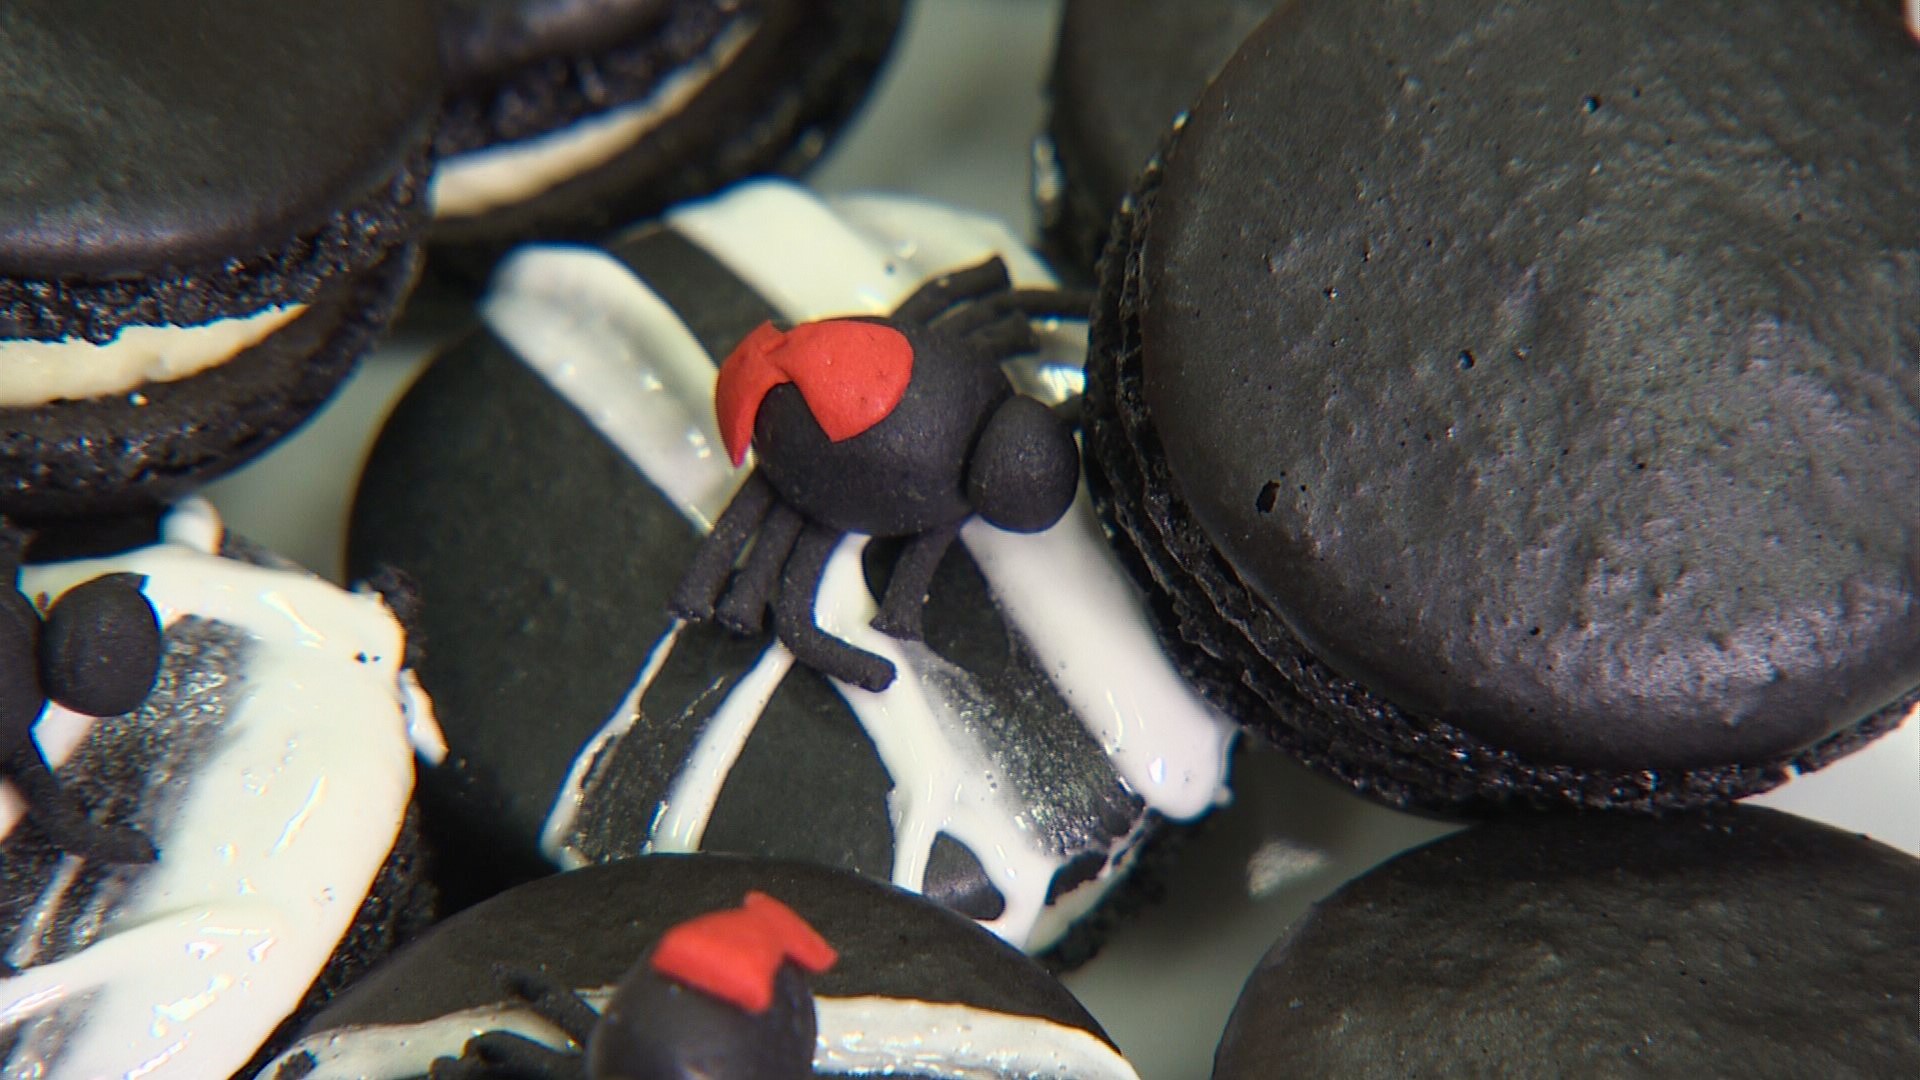 Spider web macarons are a spooky Halloween treat from this reality TV and BB Nest Baker in Bothell